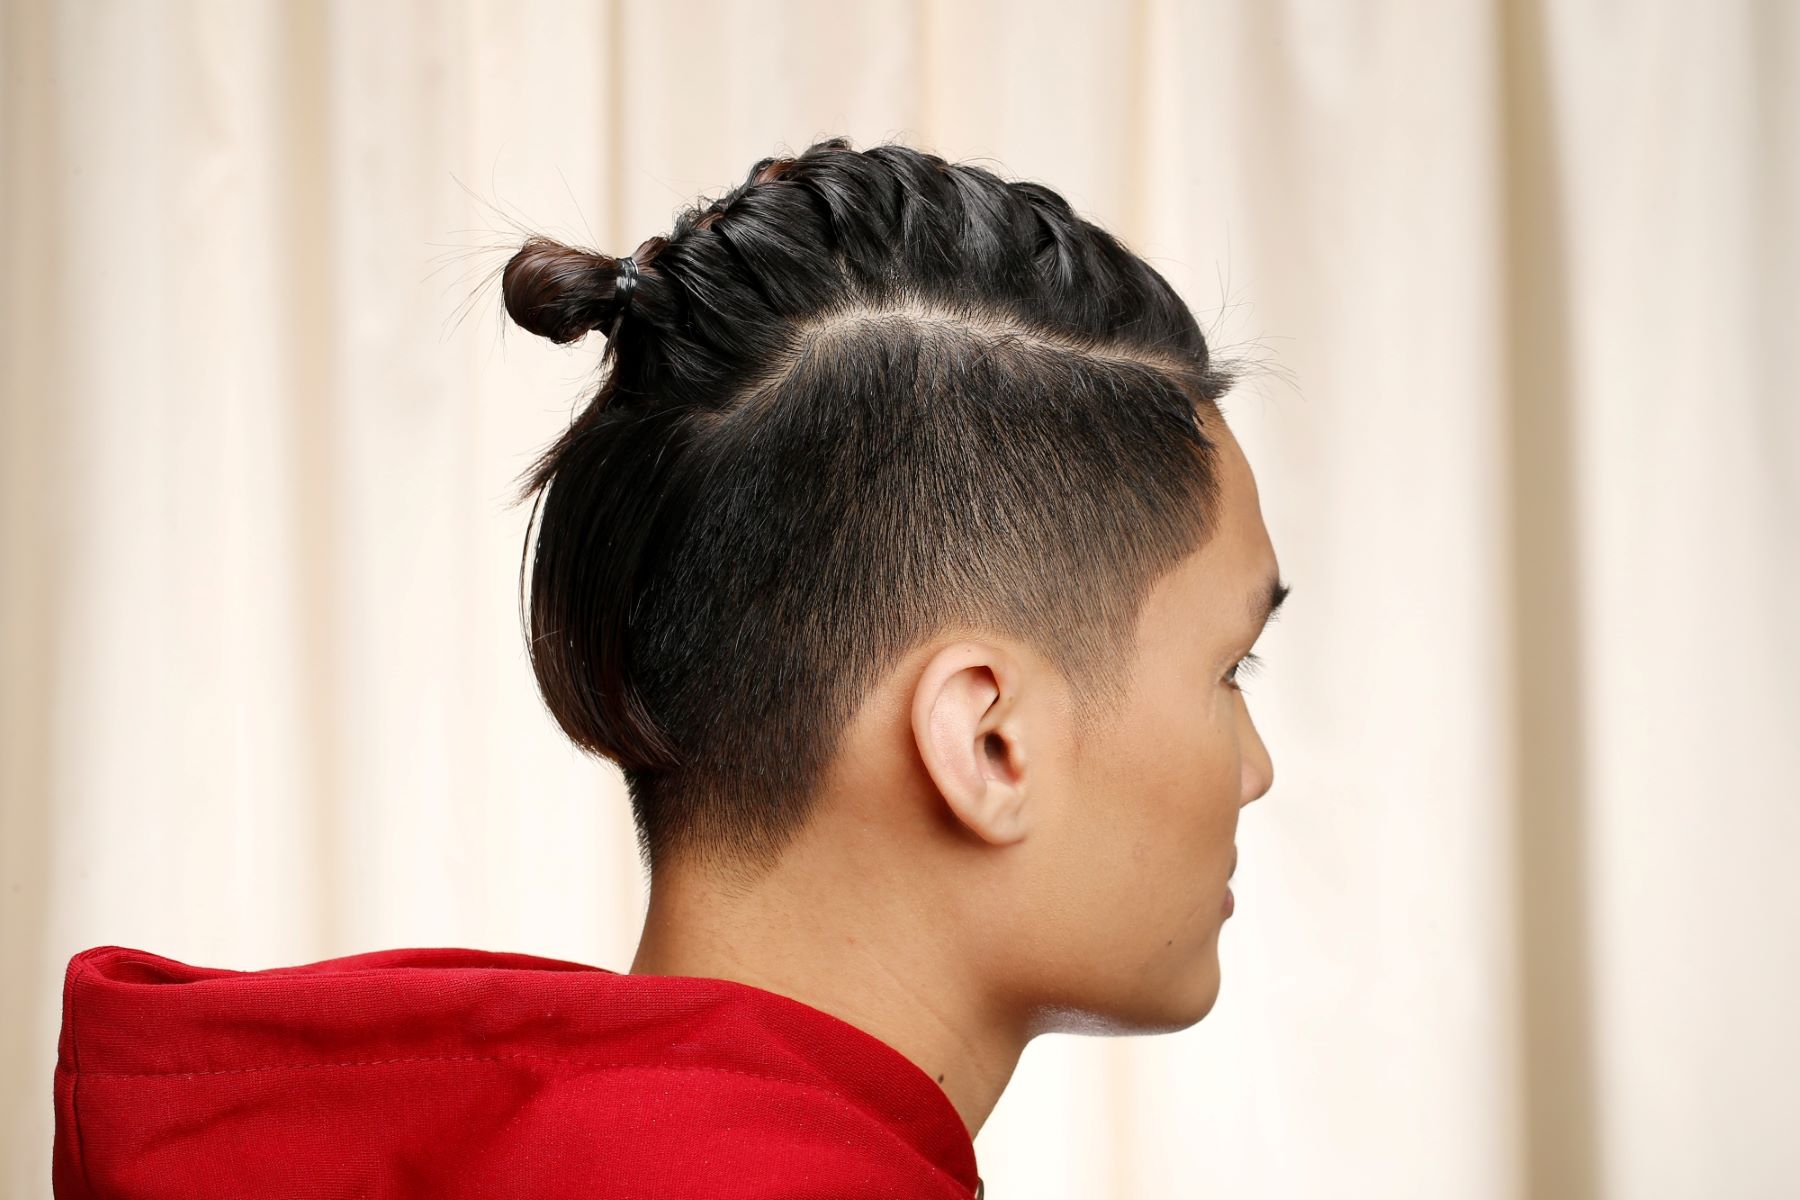 10 Trendy Braided Hairstyles For Men That Are Not Cultural Appropriation